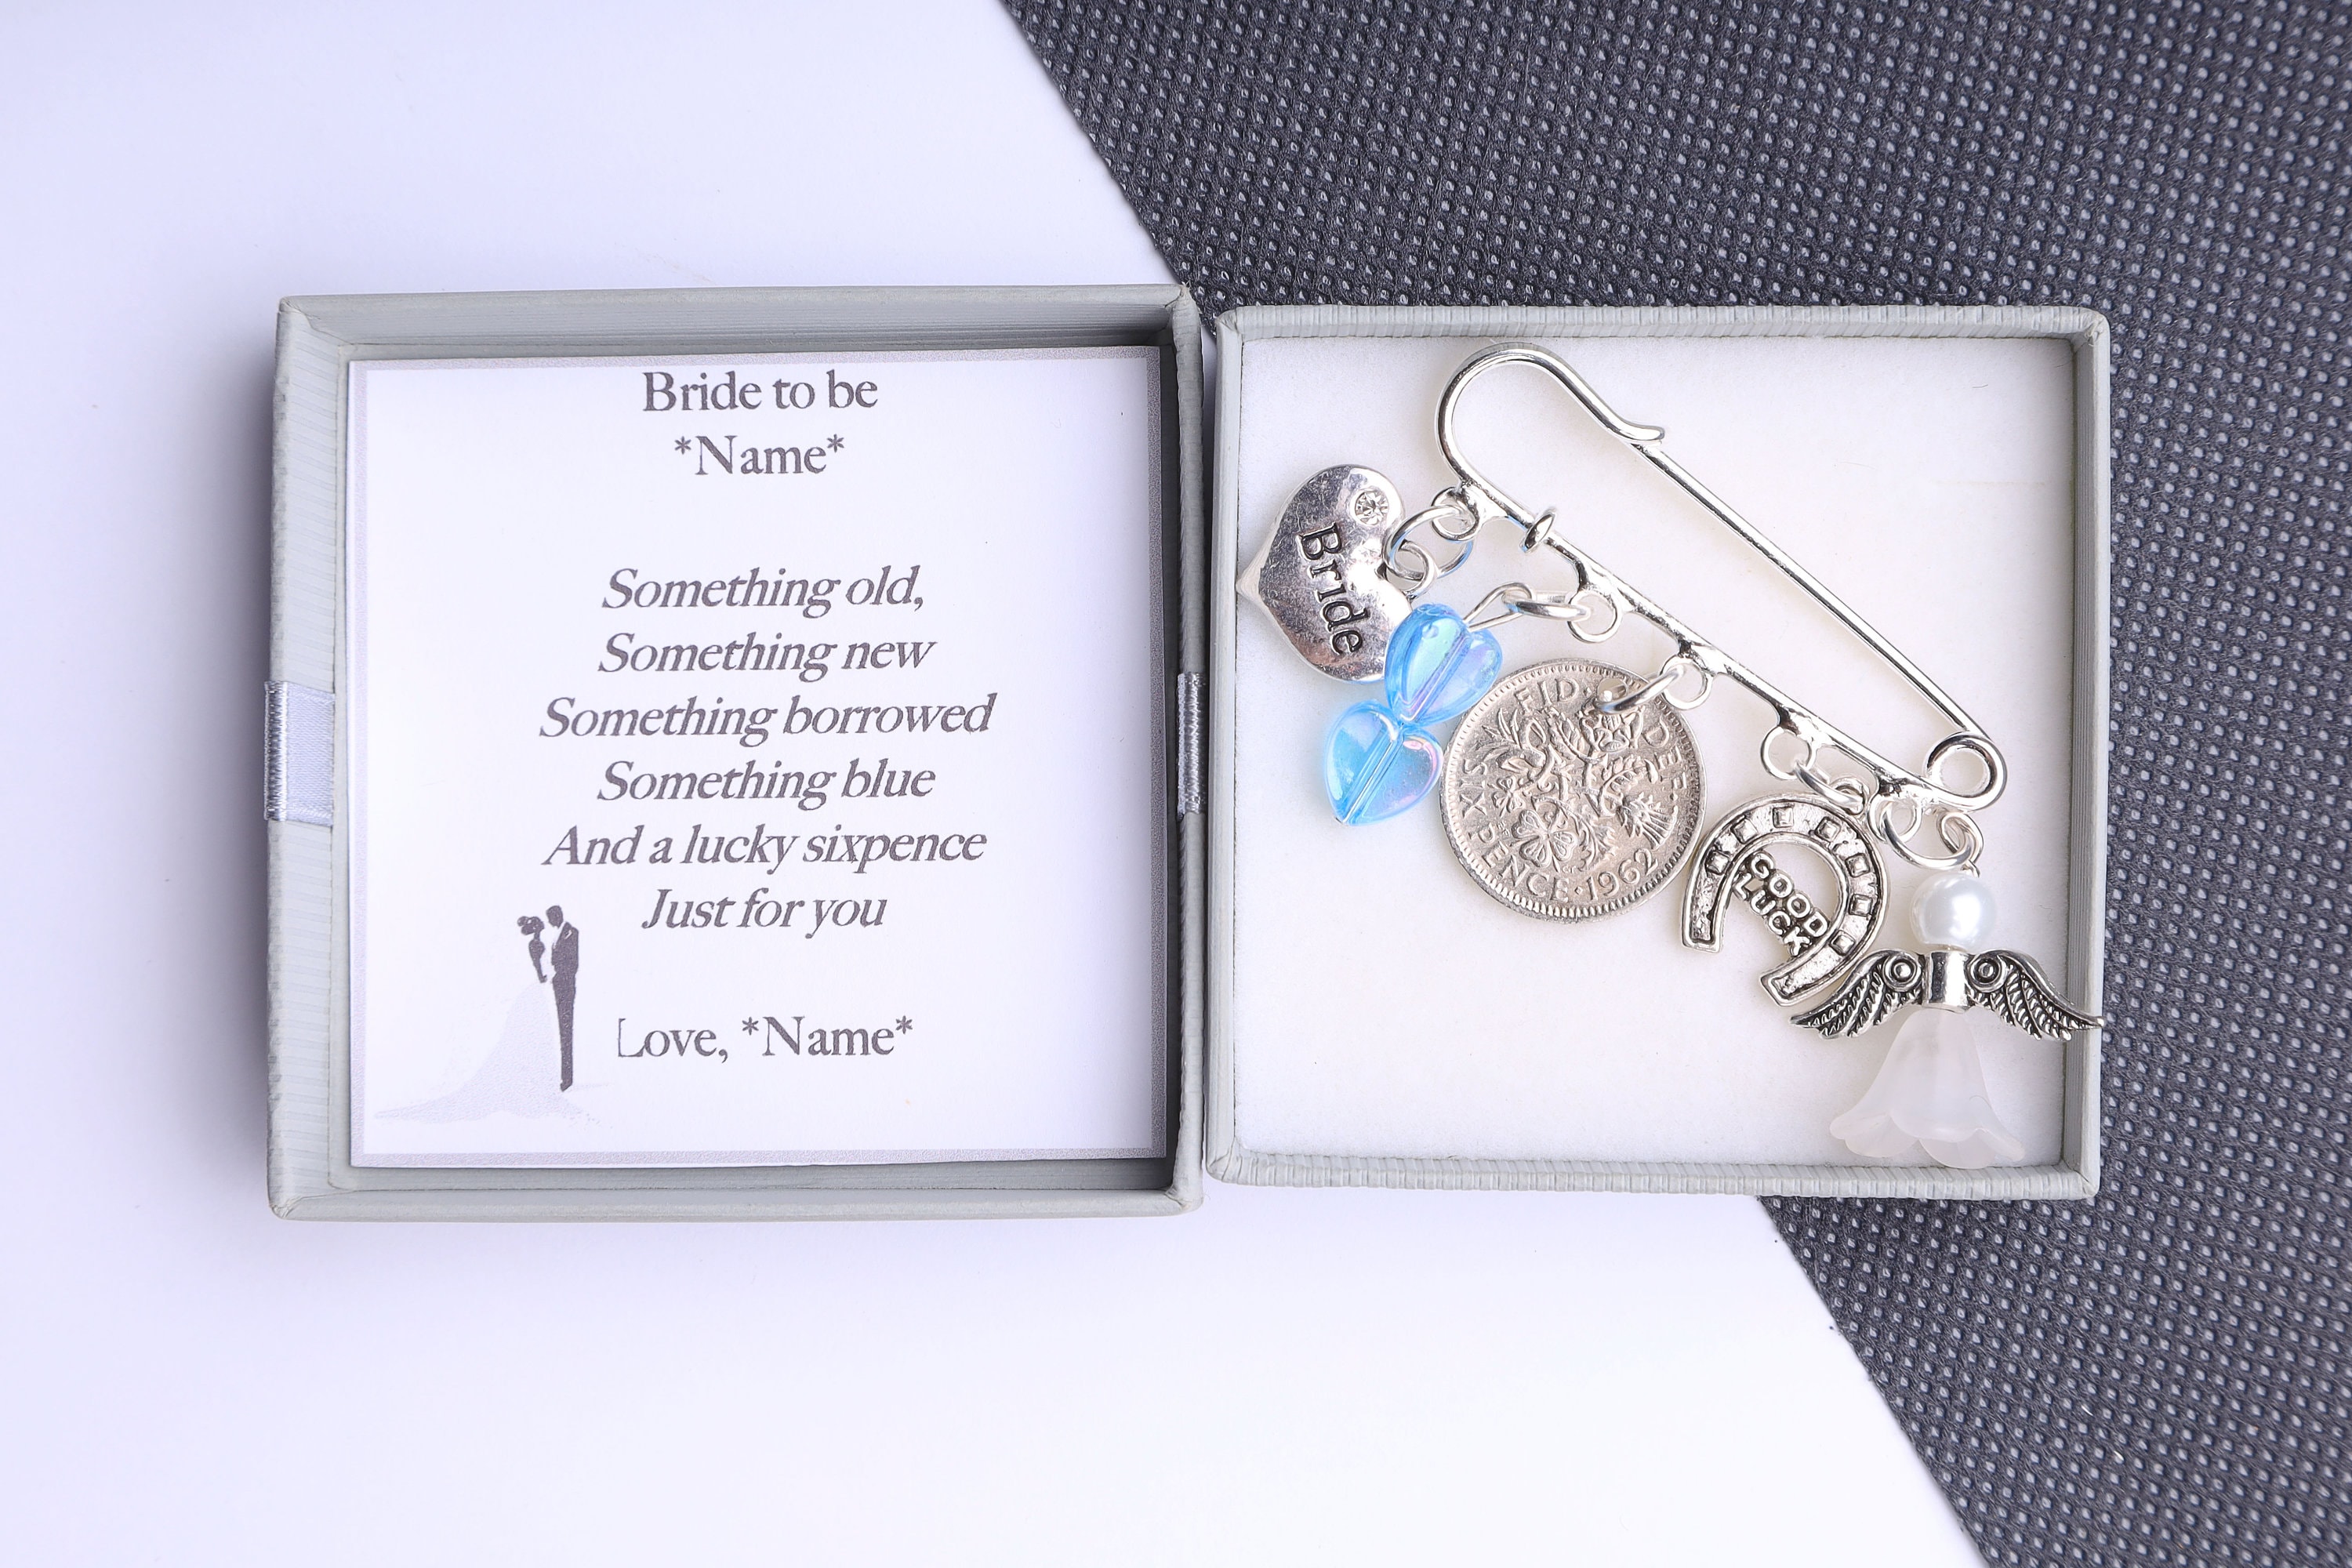 Miss Pink Bride Gifts for Her Bride Pin Bride Bouquet Charm Lucky Sixpence Bridal Kilt Pin Something Blue for Bride Wedding Gifts for Bride from